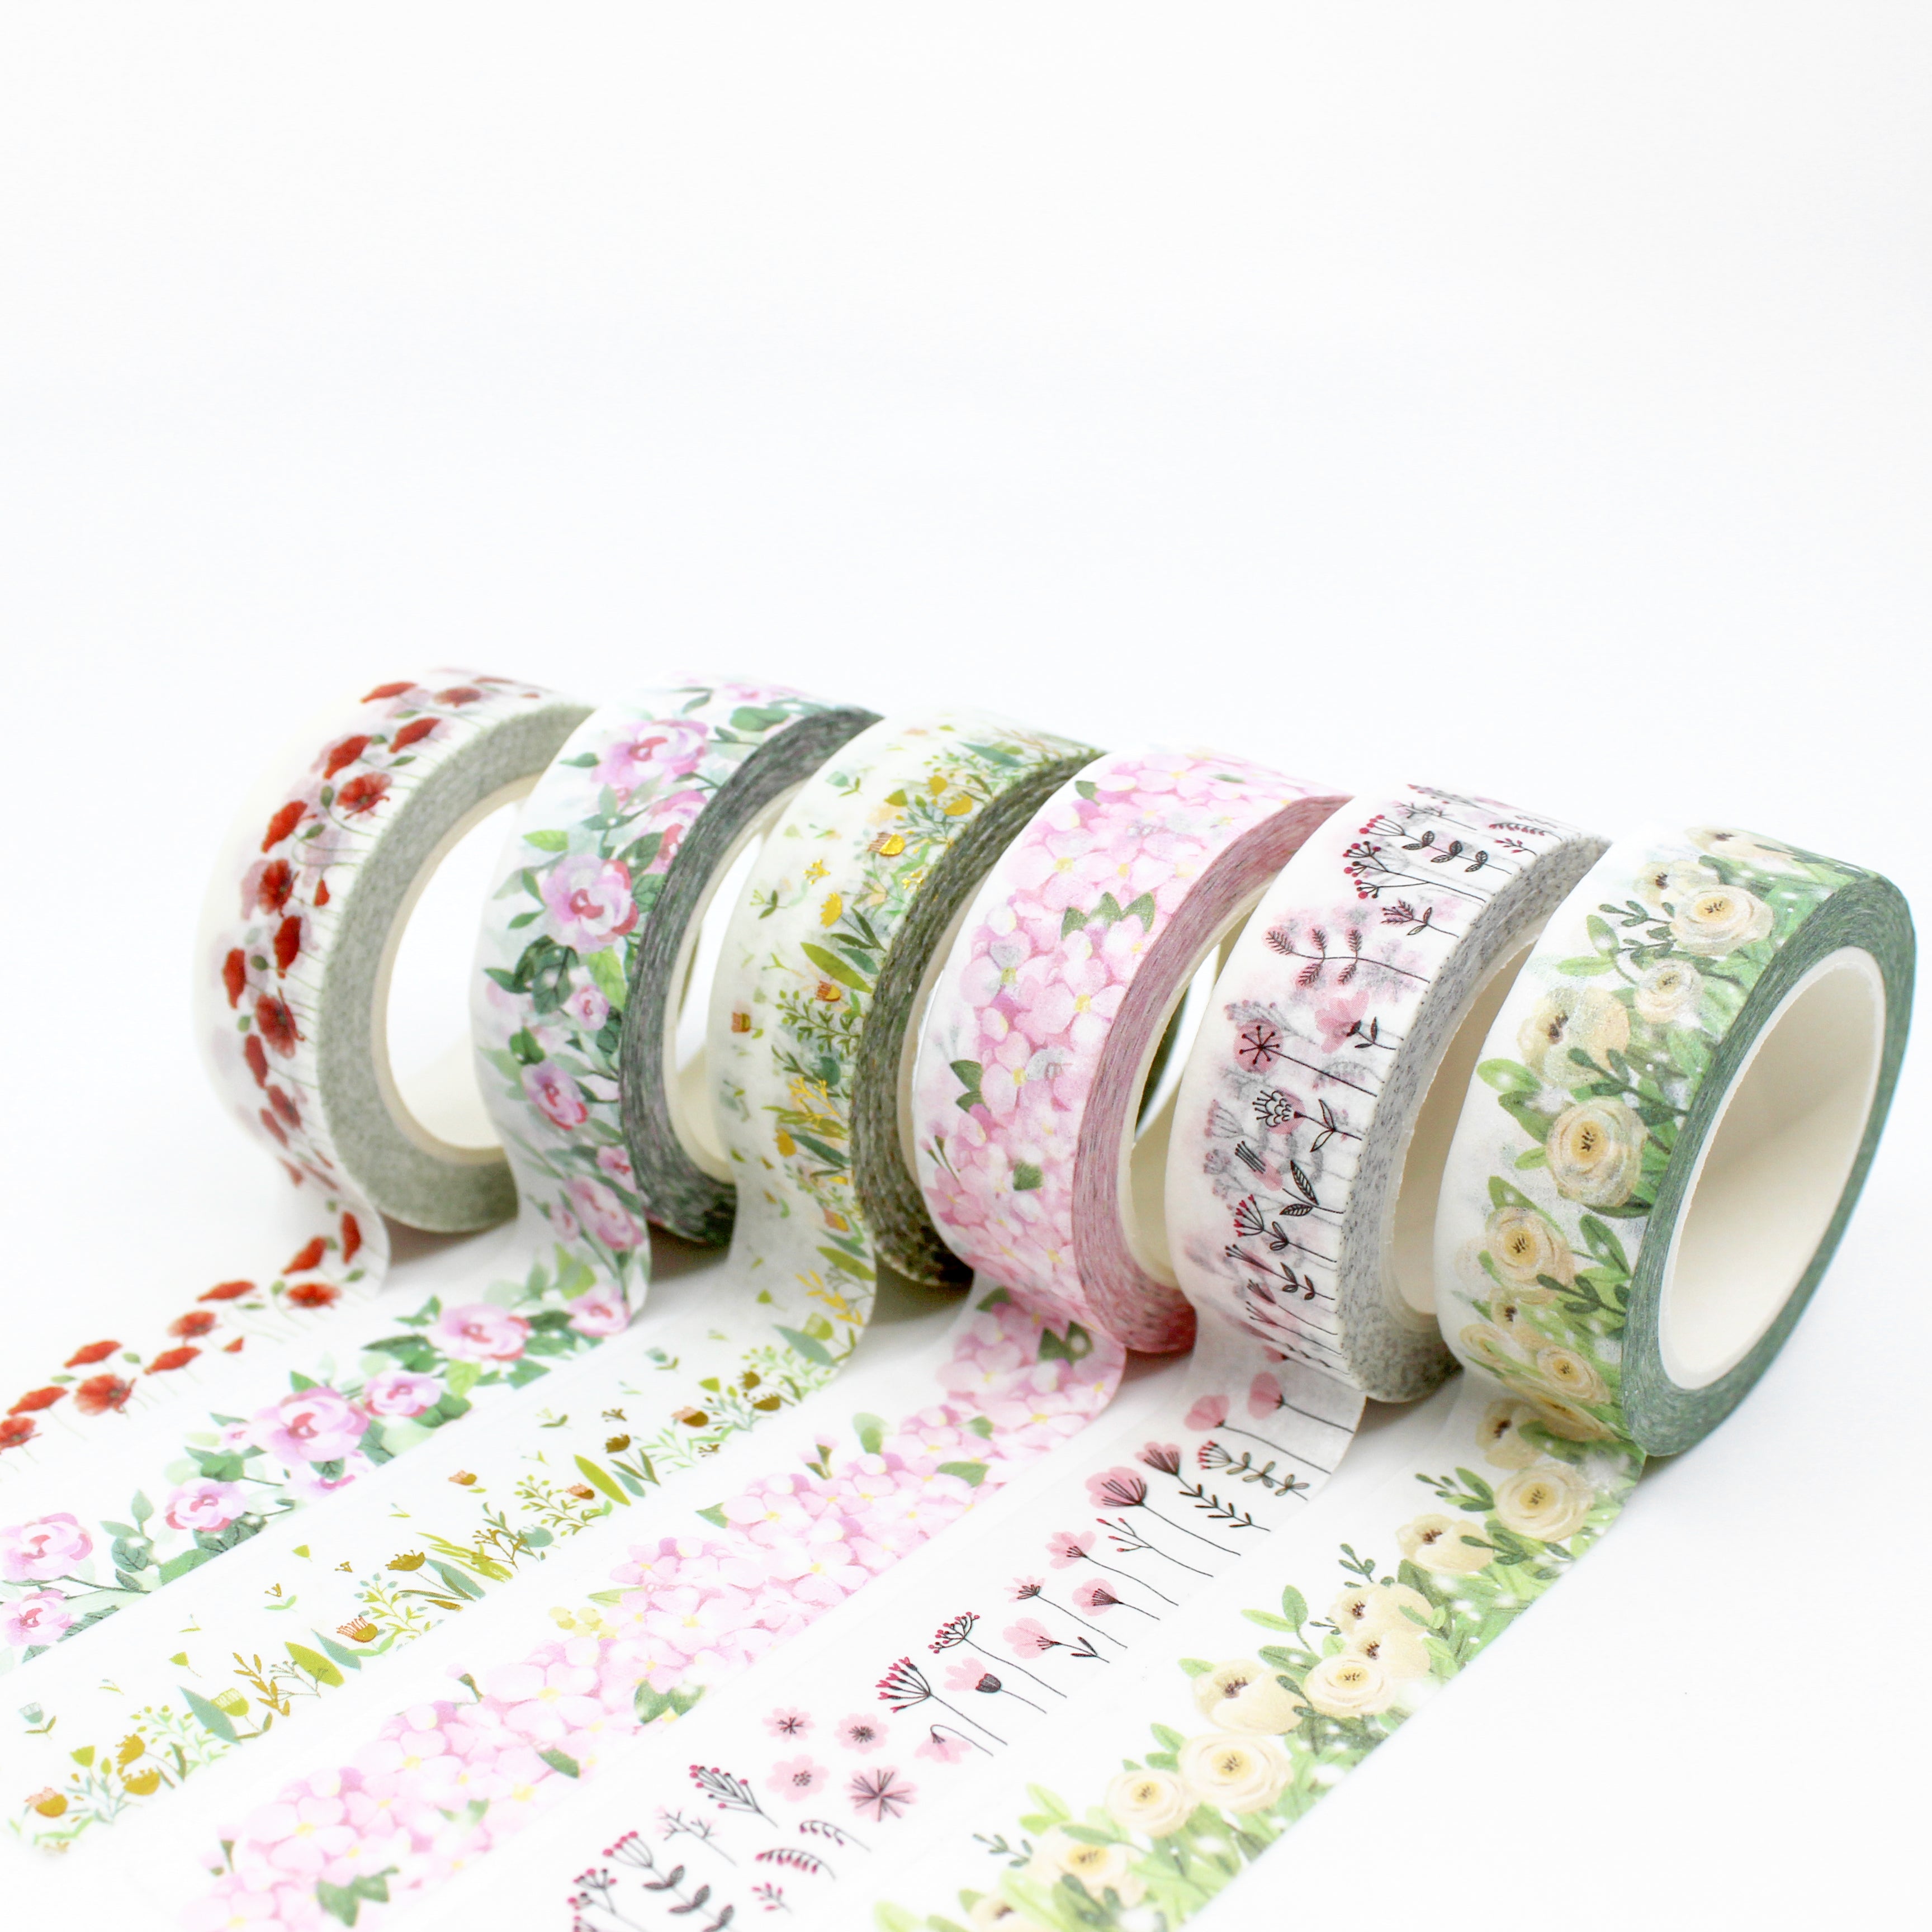 This is a cute pretty floral collections pattern washi tape for Journal Supplies, Scrapbooking washi tapes from BBB Supplies Craft Shop